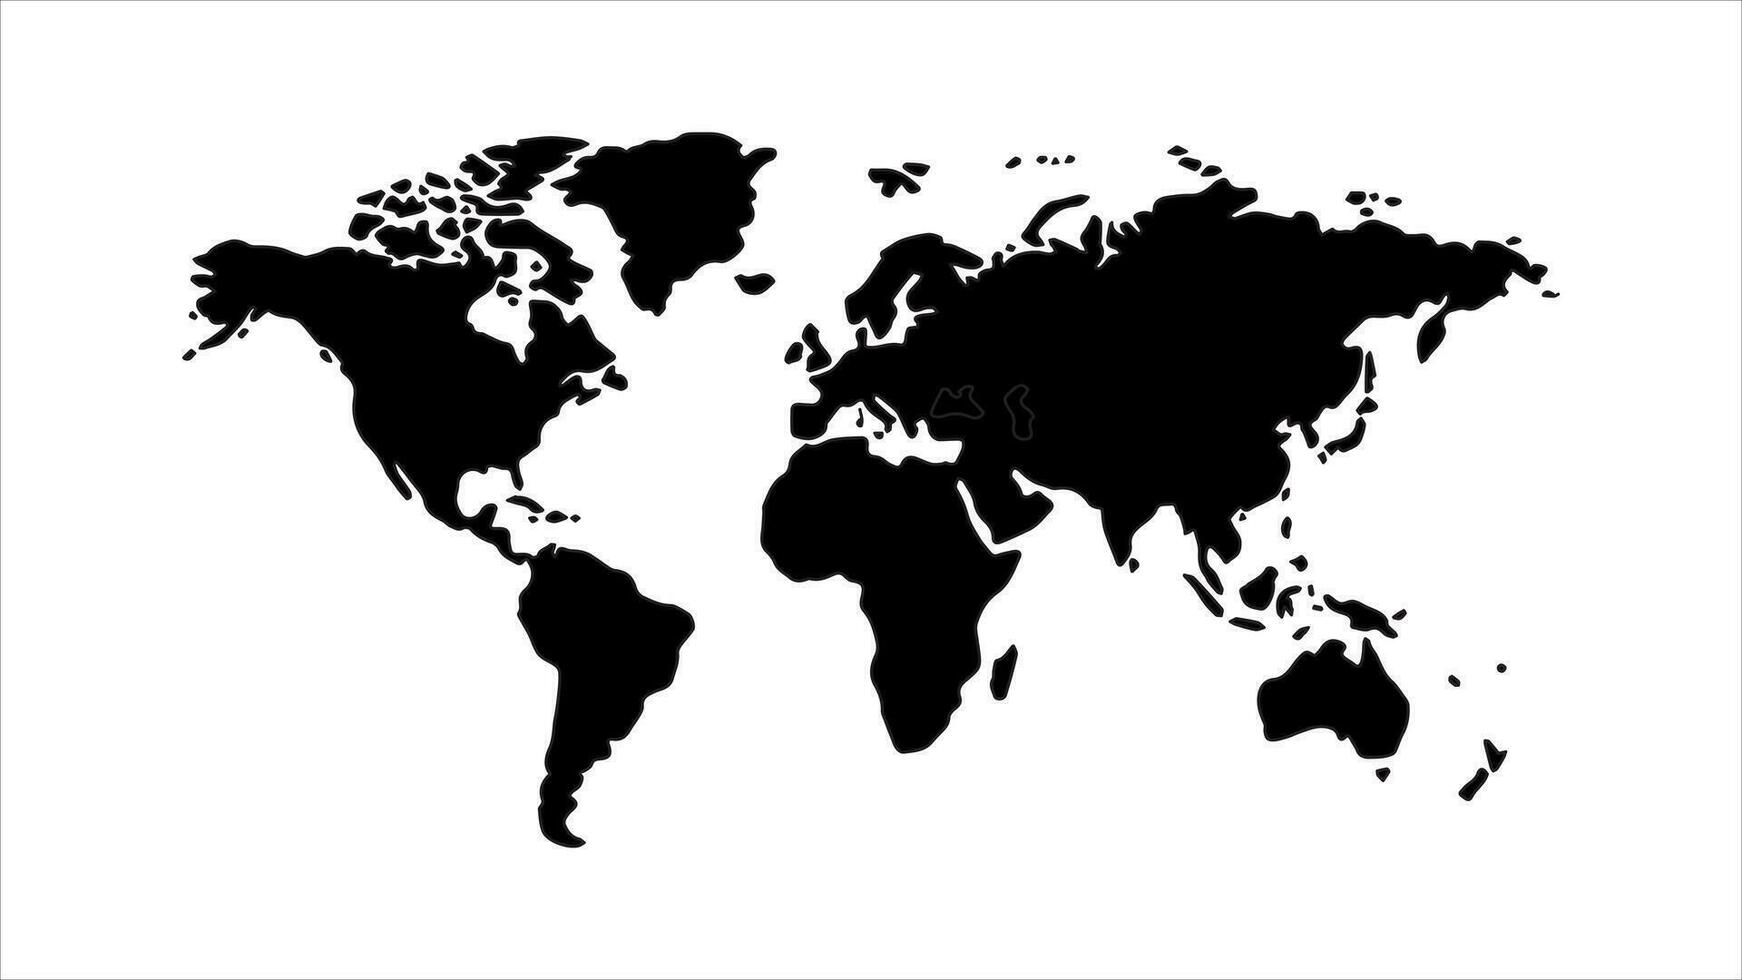 World map on white background vector